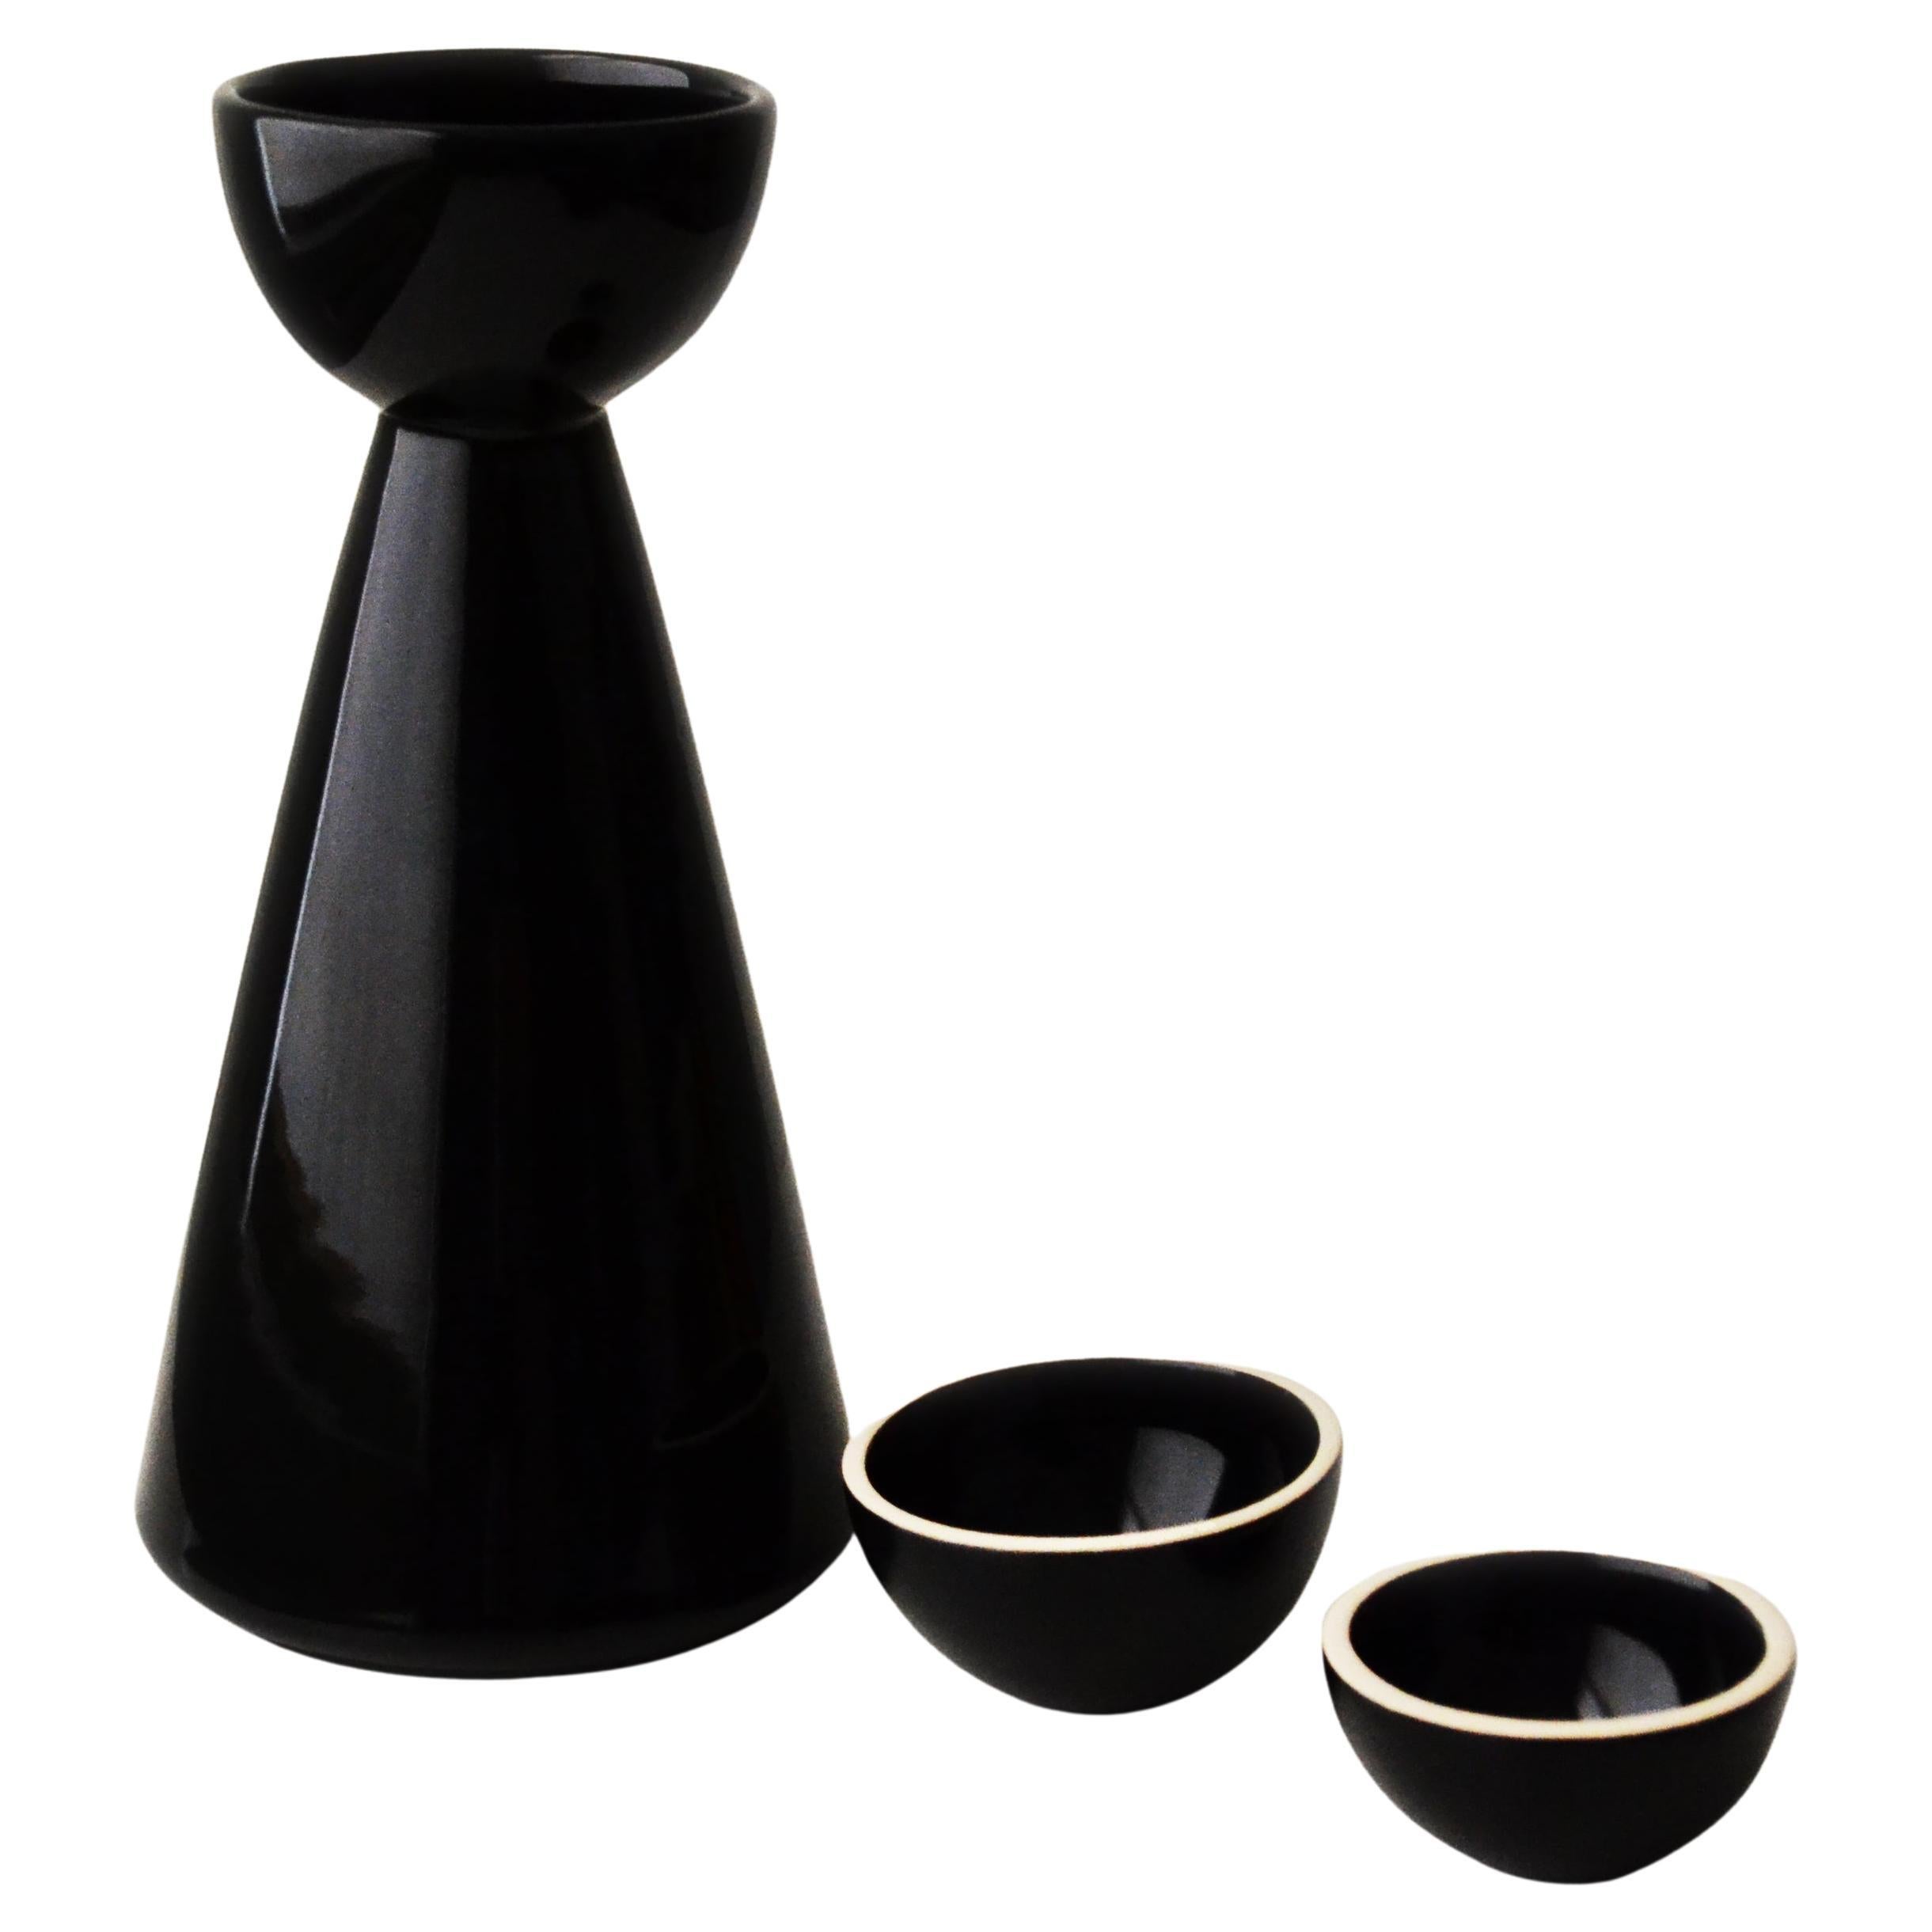 Special Edition Ceramic Carafe and Cups Shine Black Mezcal bottle Halfmoon For Sale